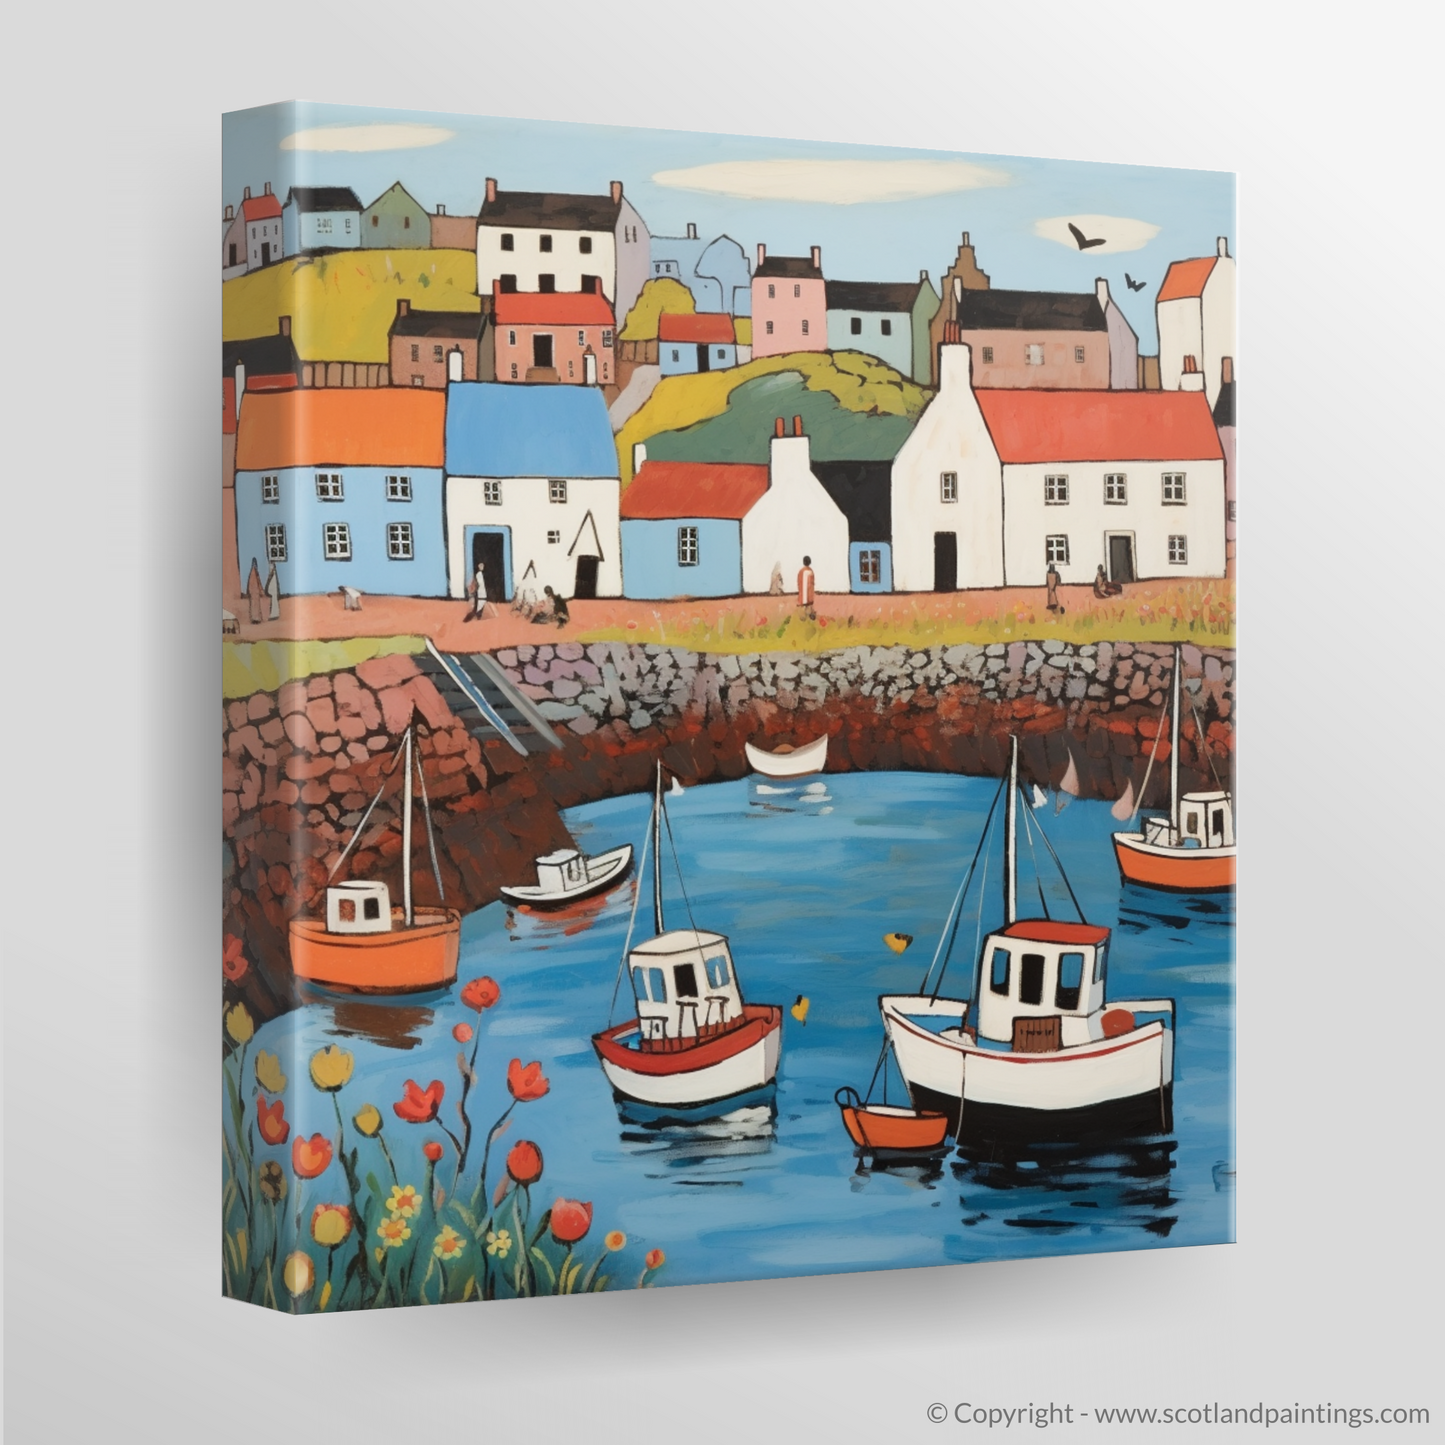 Crail Harbour Delight: A Naive Art Gem from the Scottish Coast